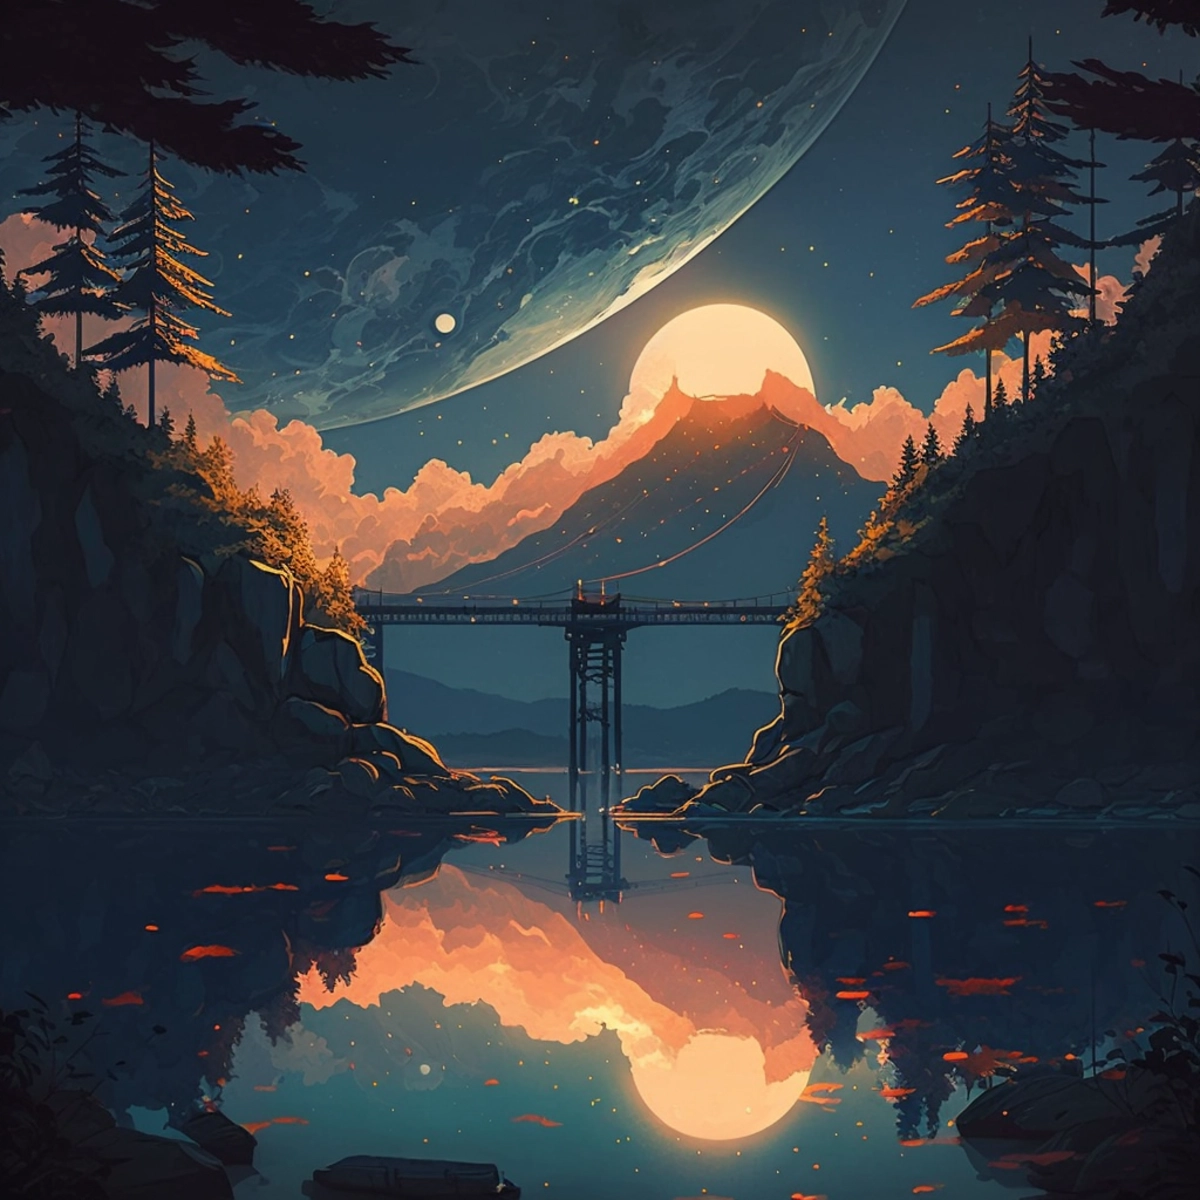 A magical landscape with islands, connected by glowing bridges, and a sky filled with stars